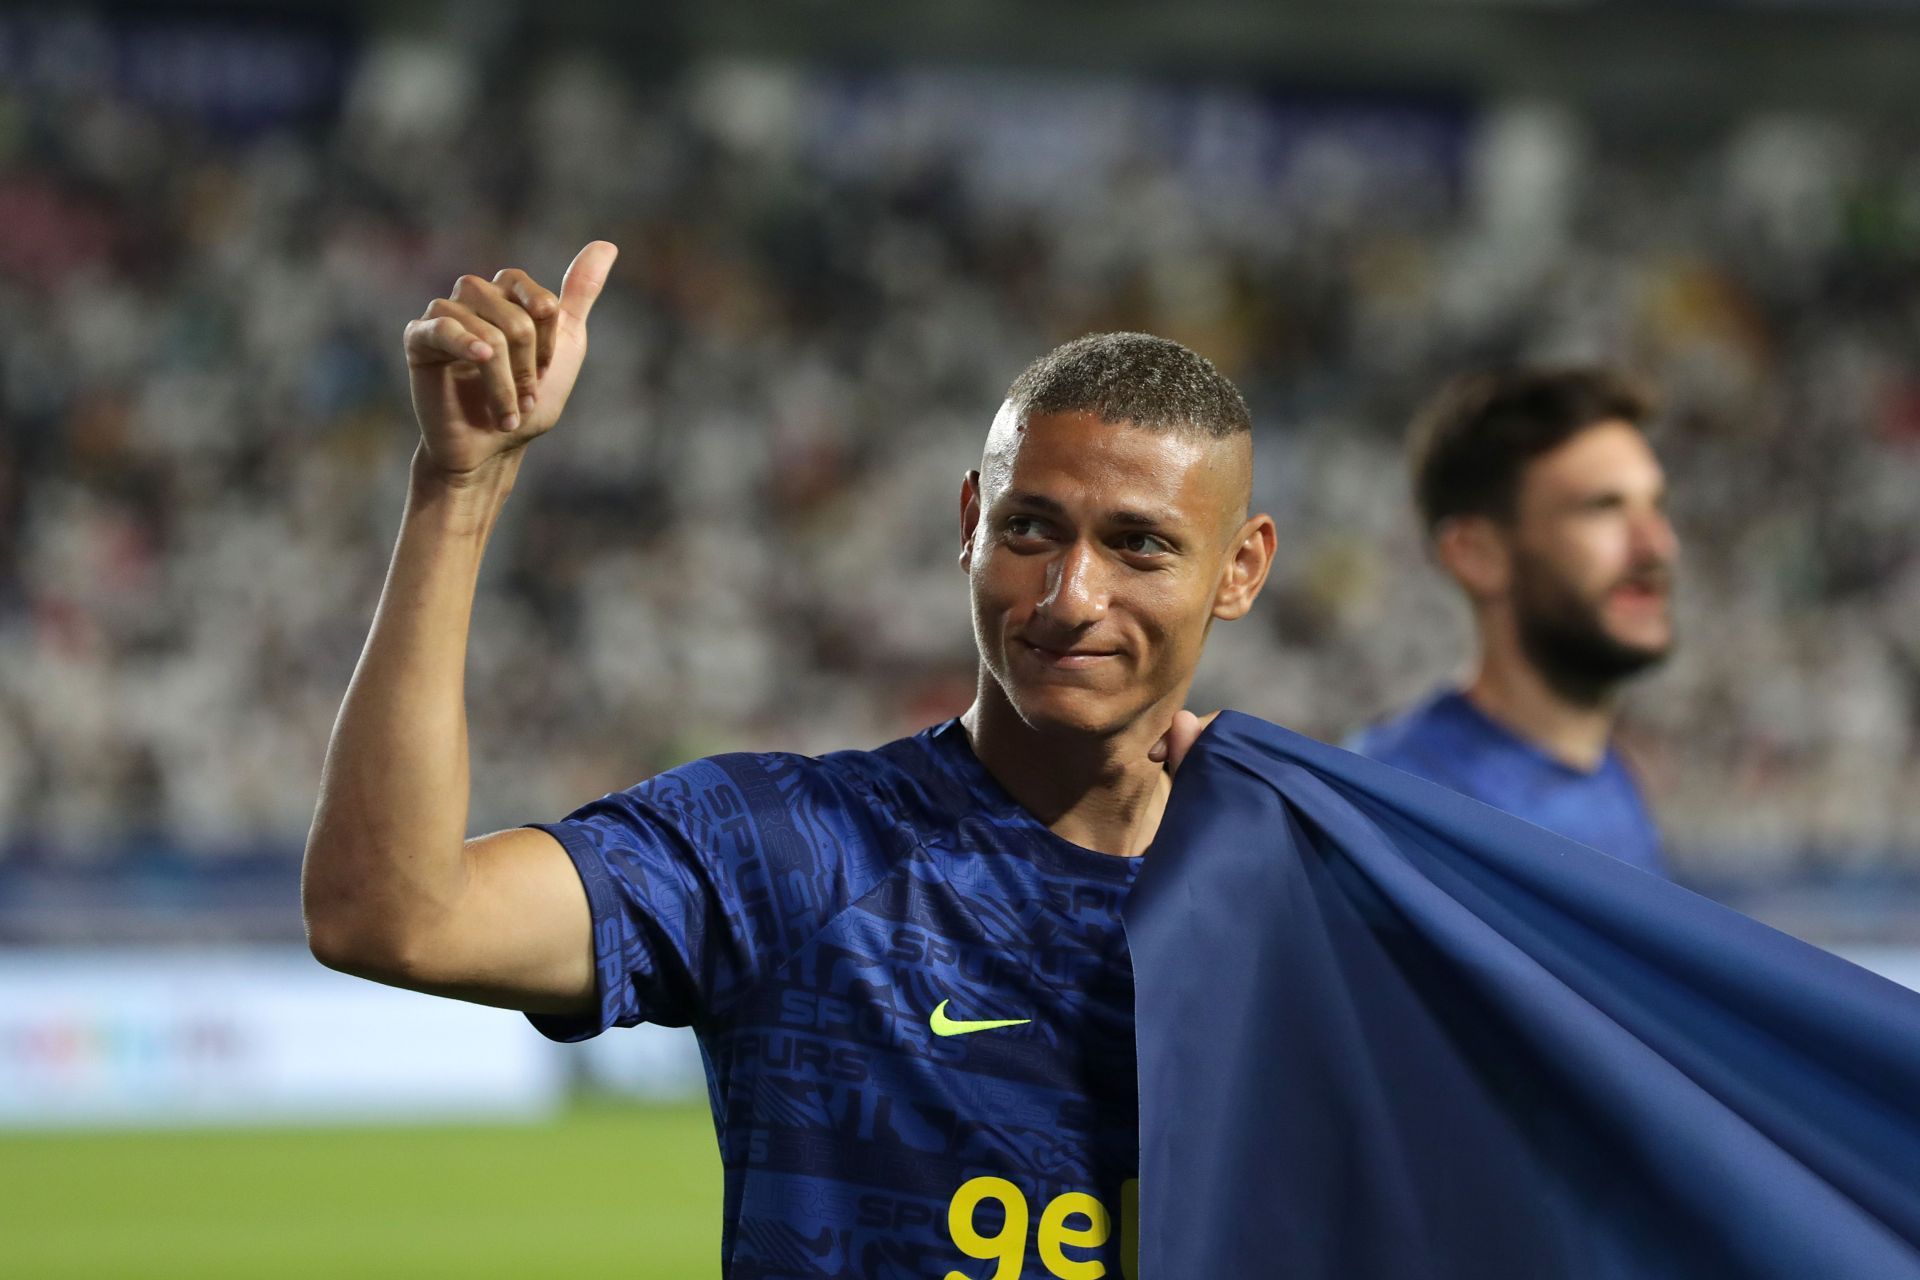 Richarlison has joined Tottenham from Everton this summer